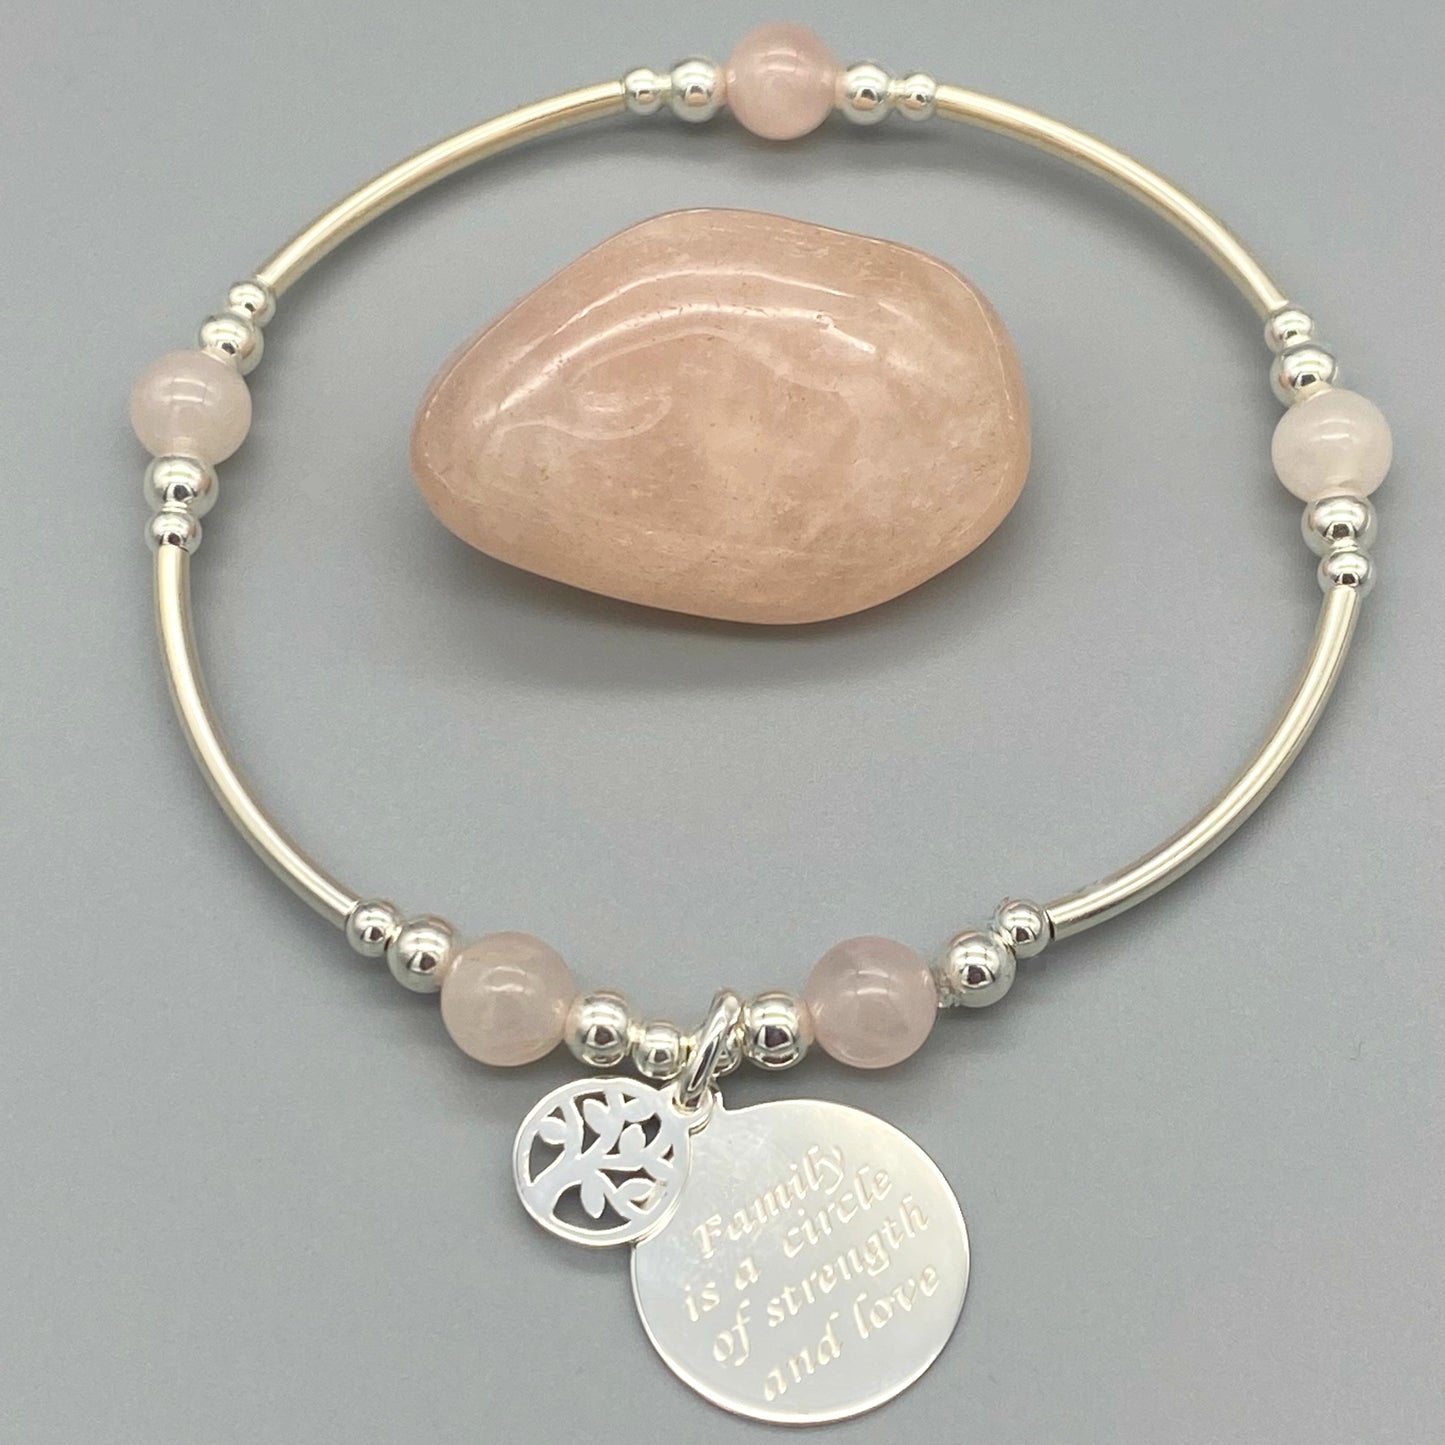 "Family is a circle of strength & love" charm rose quartz women's sterling silver stacking bracelet by My Silver Wish